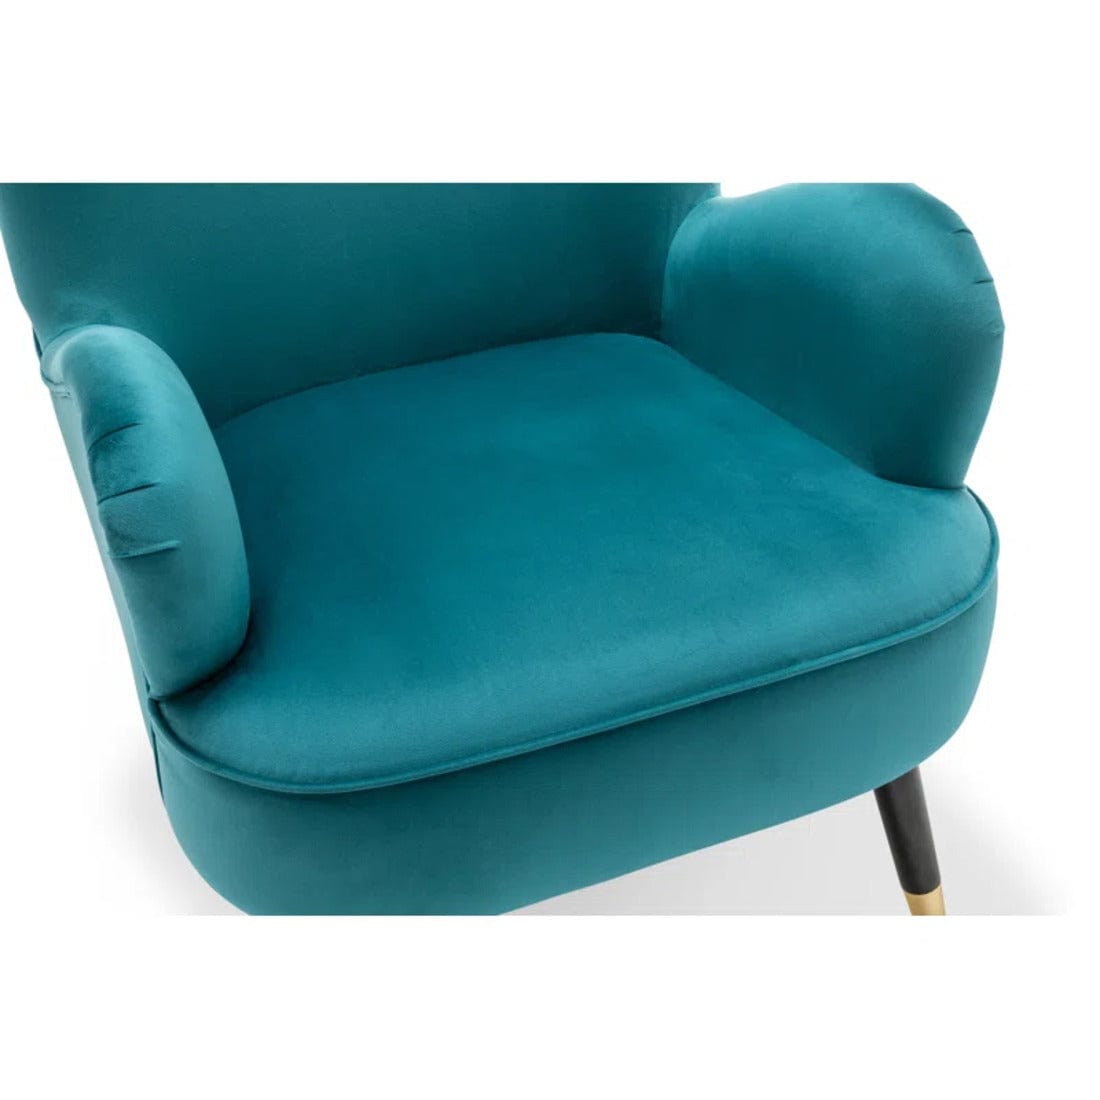 epperly chair with ottoman